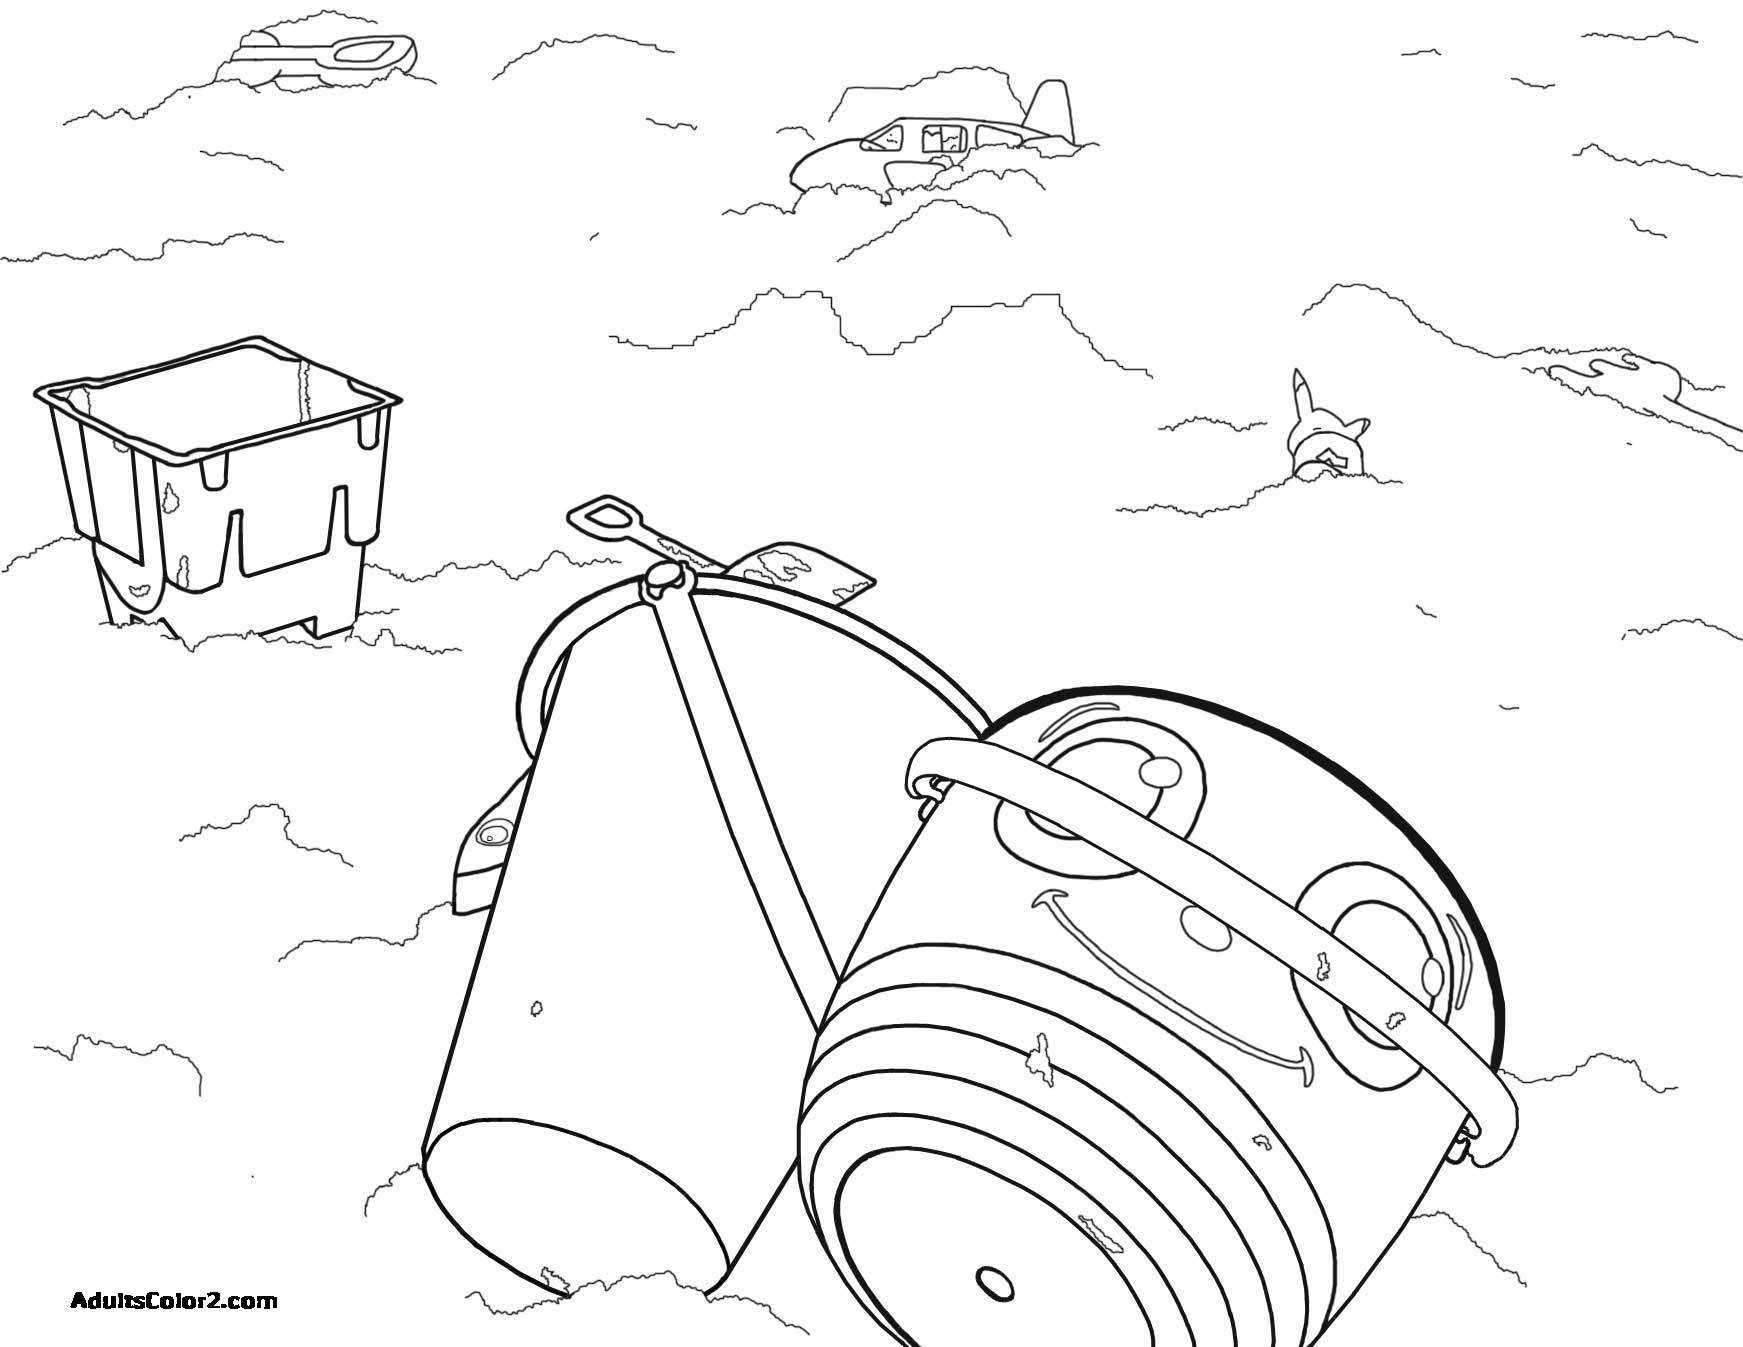 Beach Coloring Pages: Imagine You're There Without A Care